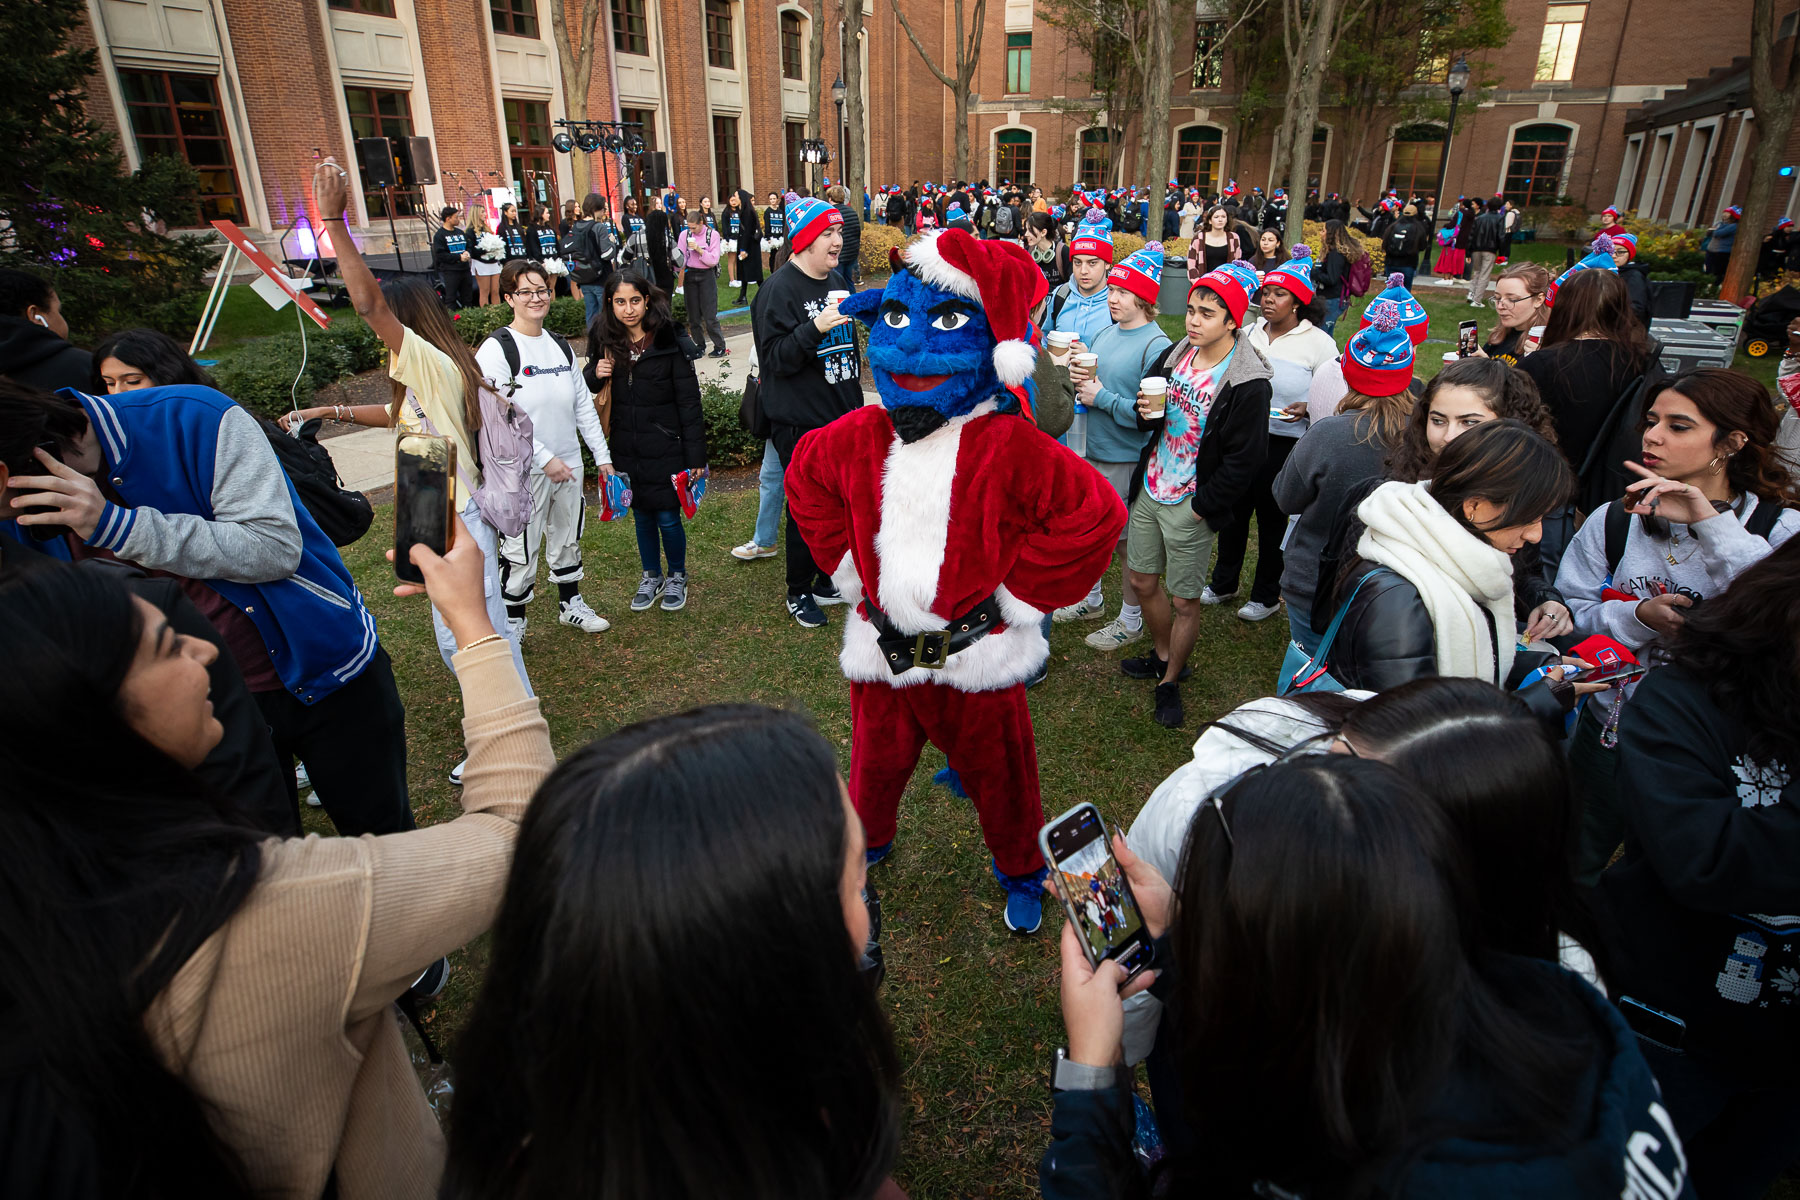 Santa Dibs is always a jolly guest at the annual Tree Lighting. (Photo by Jeff Carrion / DePaul University) 